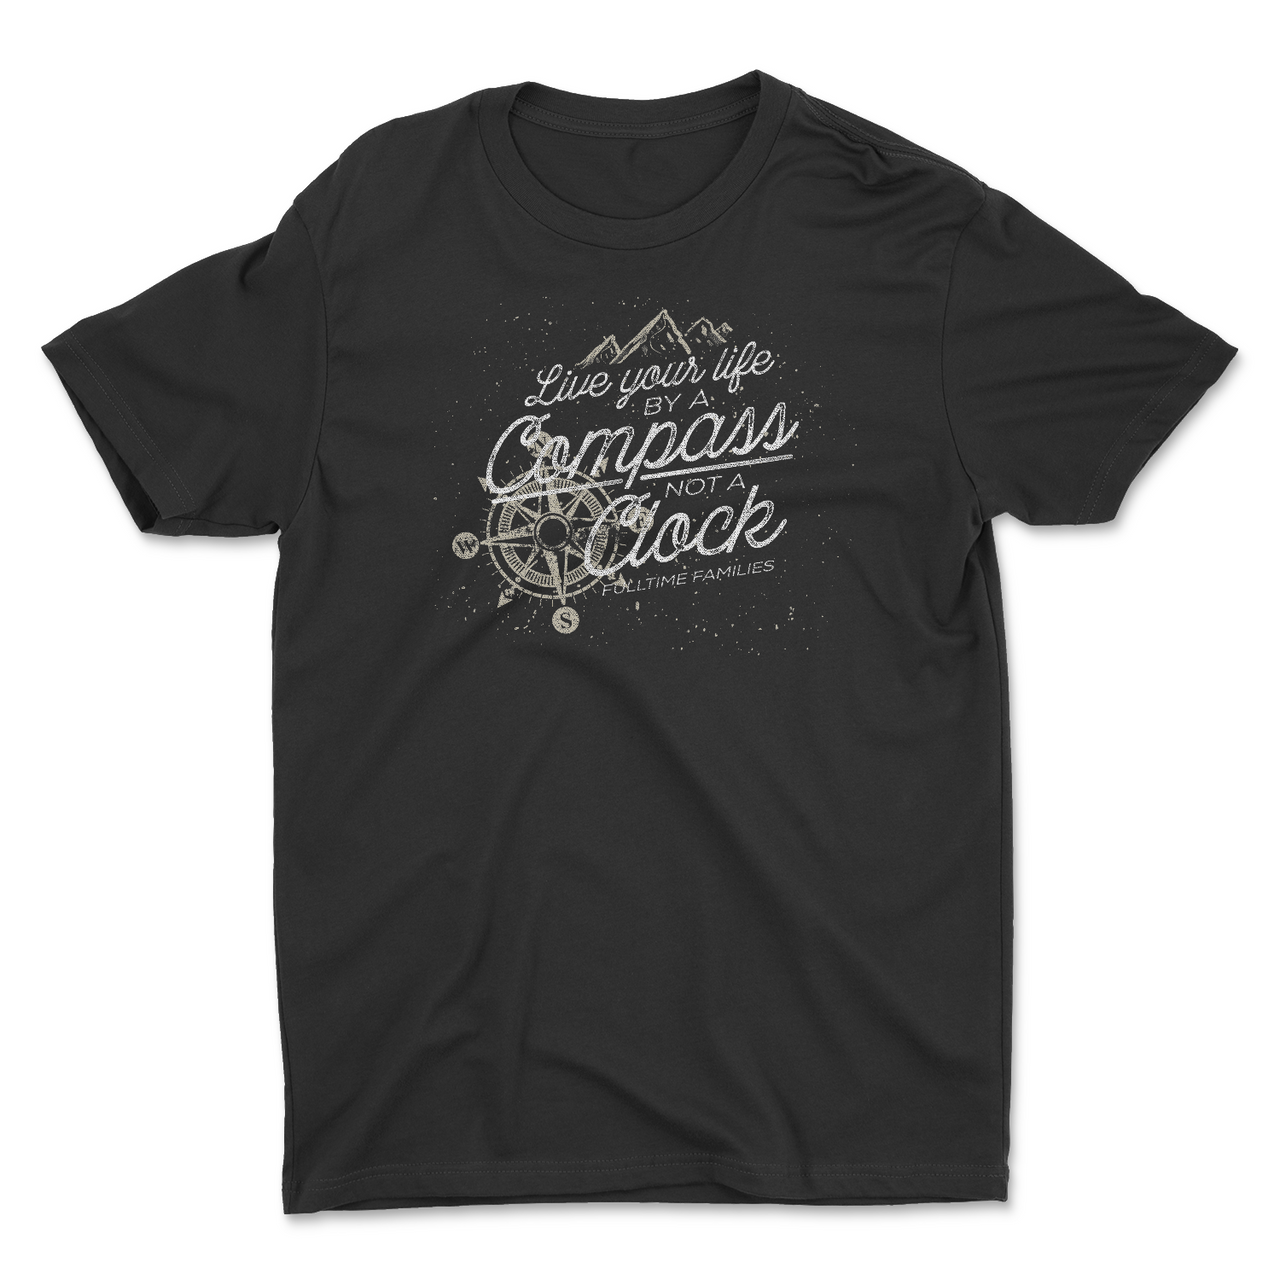 Live Your Life By a Compass Shirt